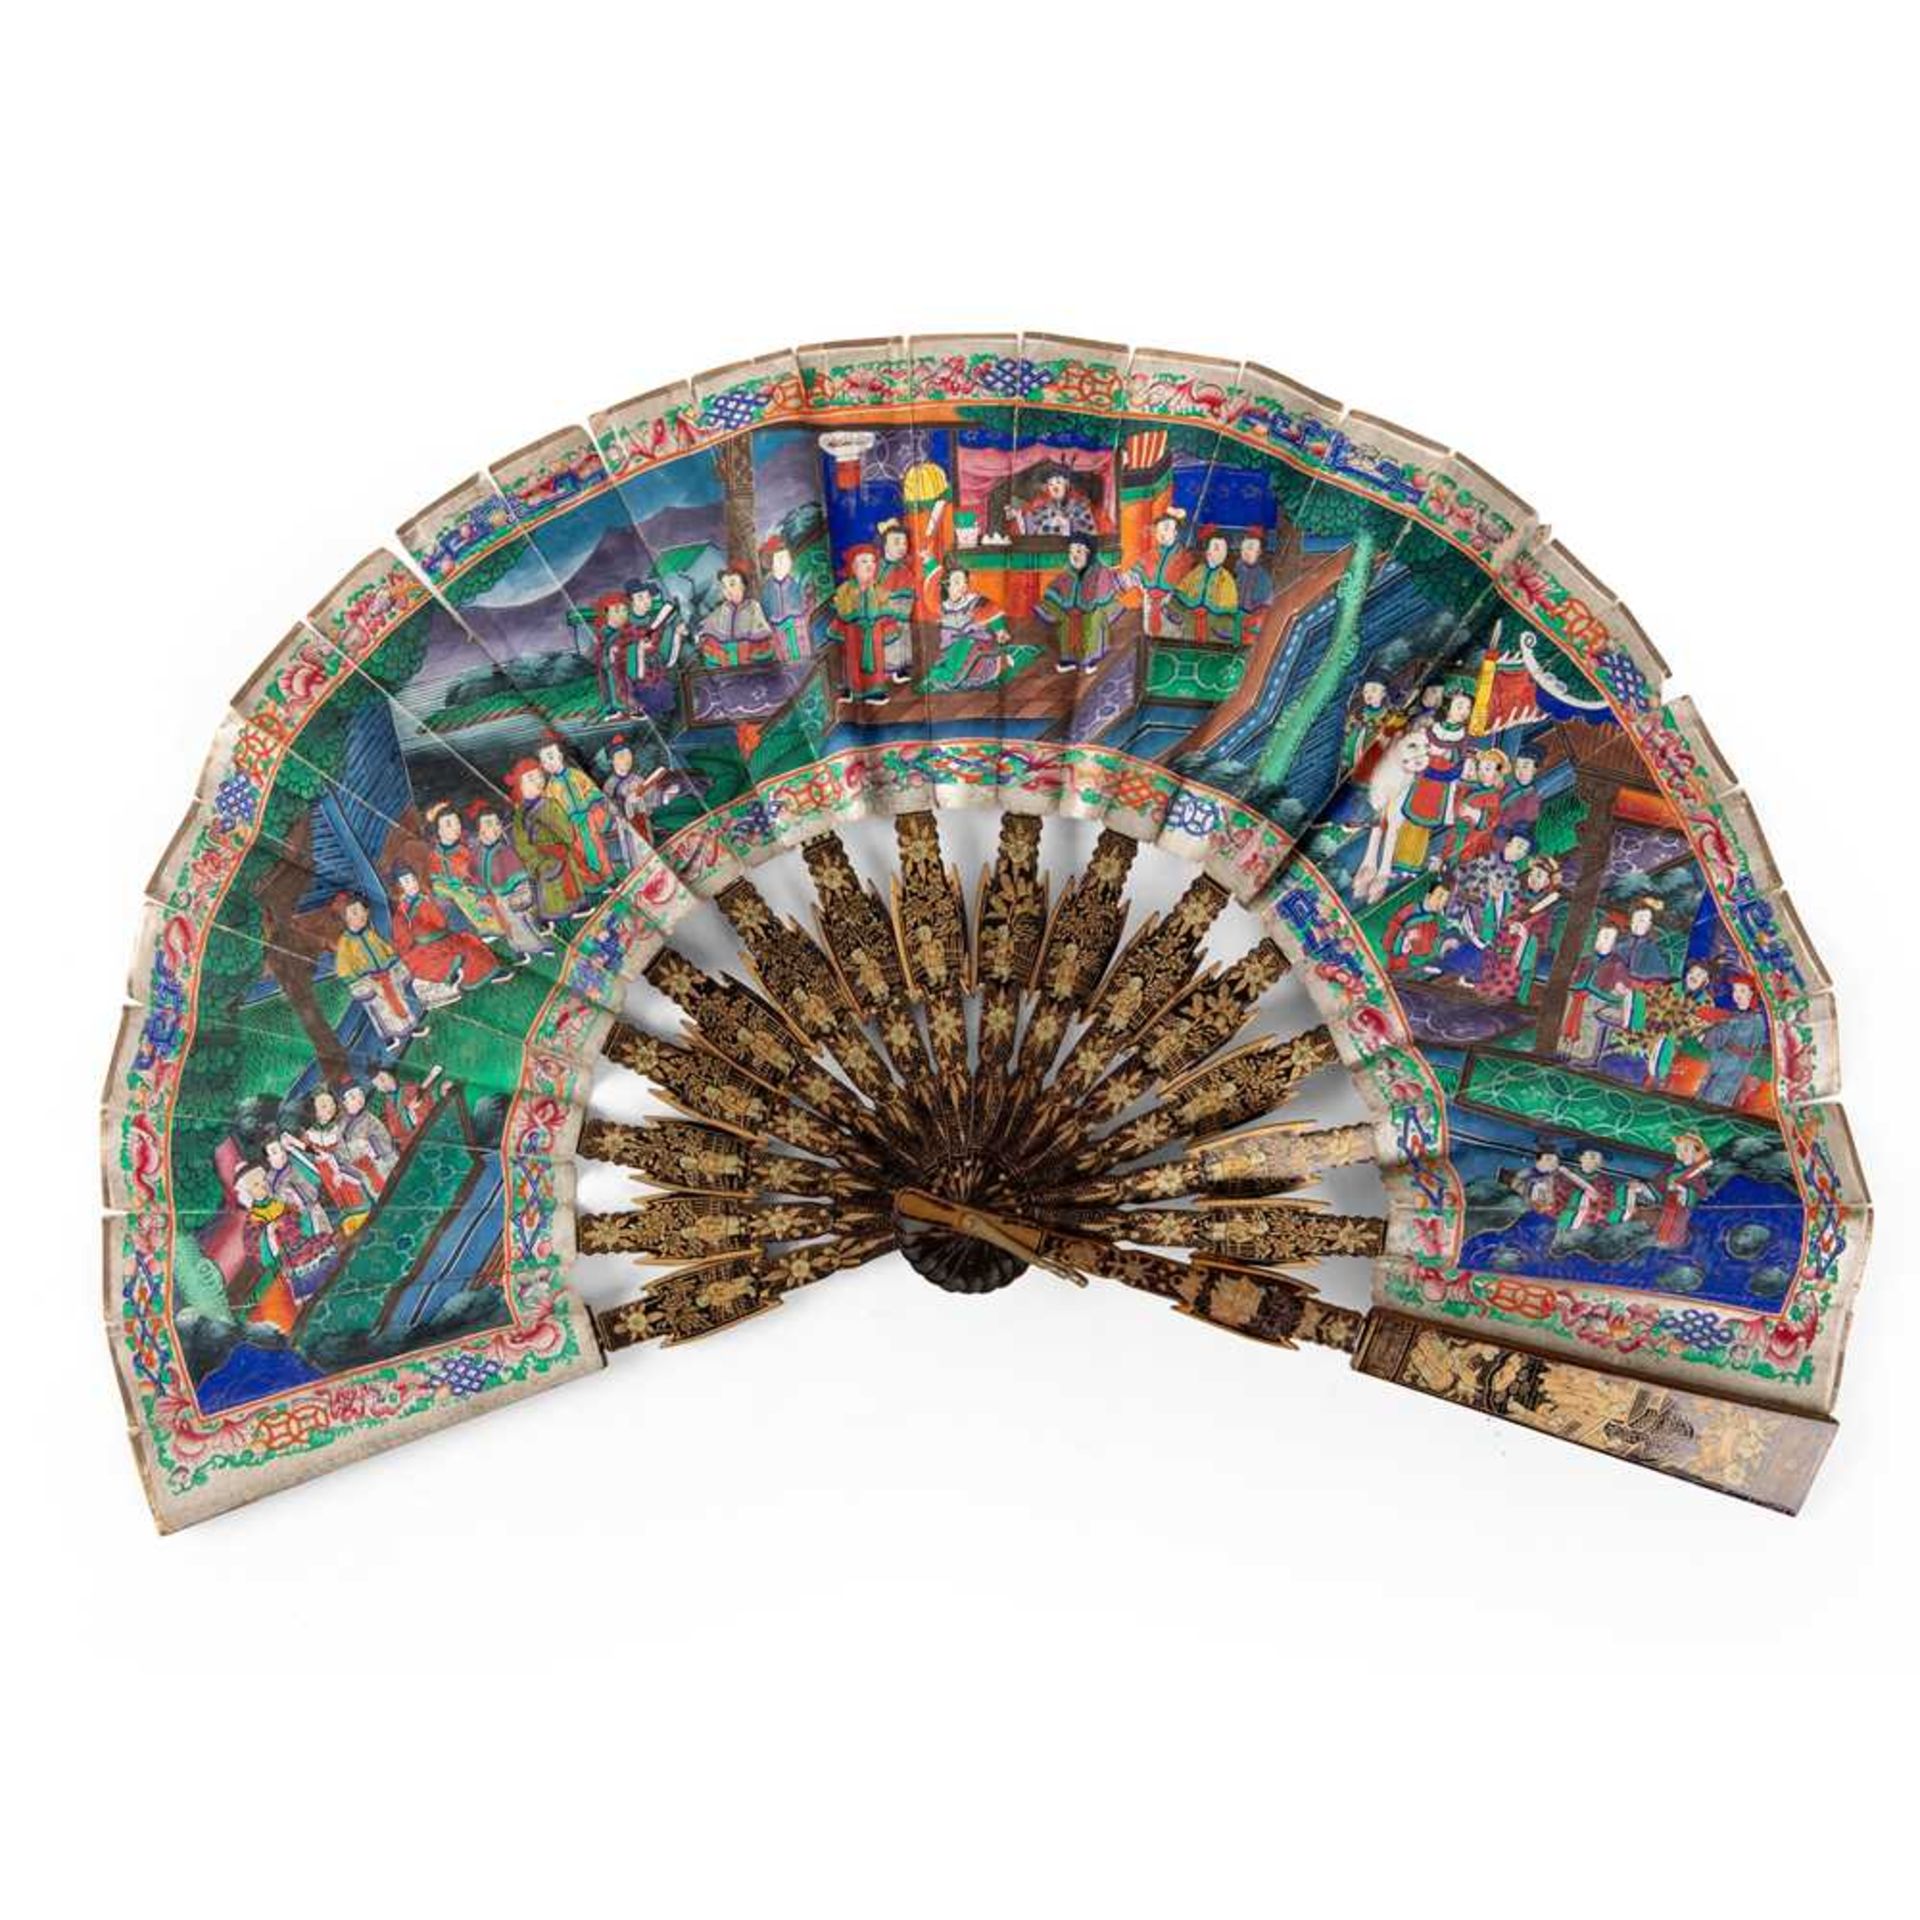 CANTON LACQUERED AND PAPER 'TELESCOPIC' FAN QING DYNASTY, MID-19TH CENTURY